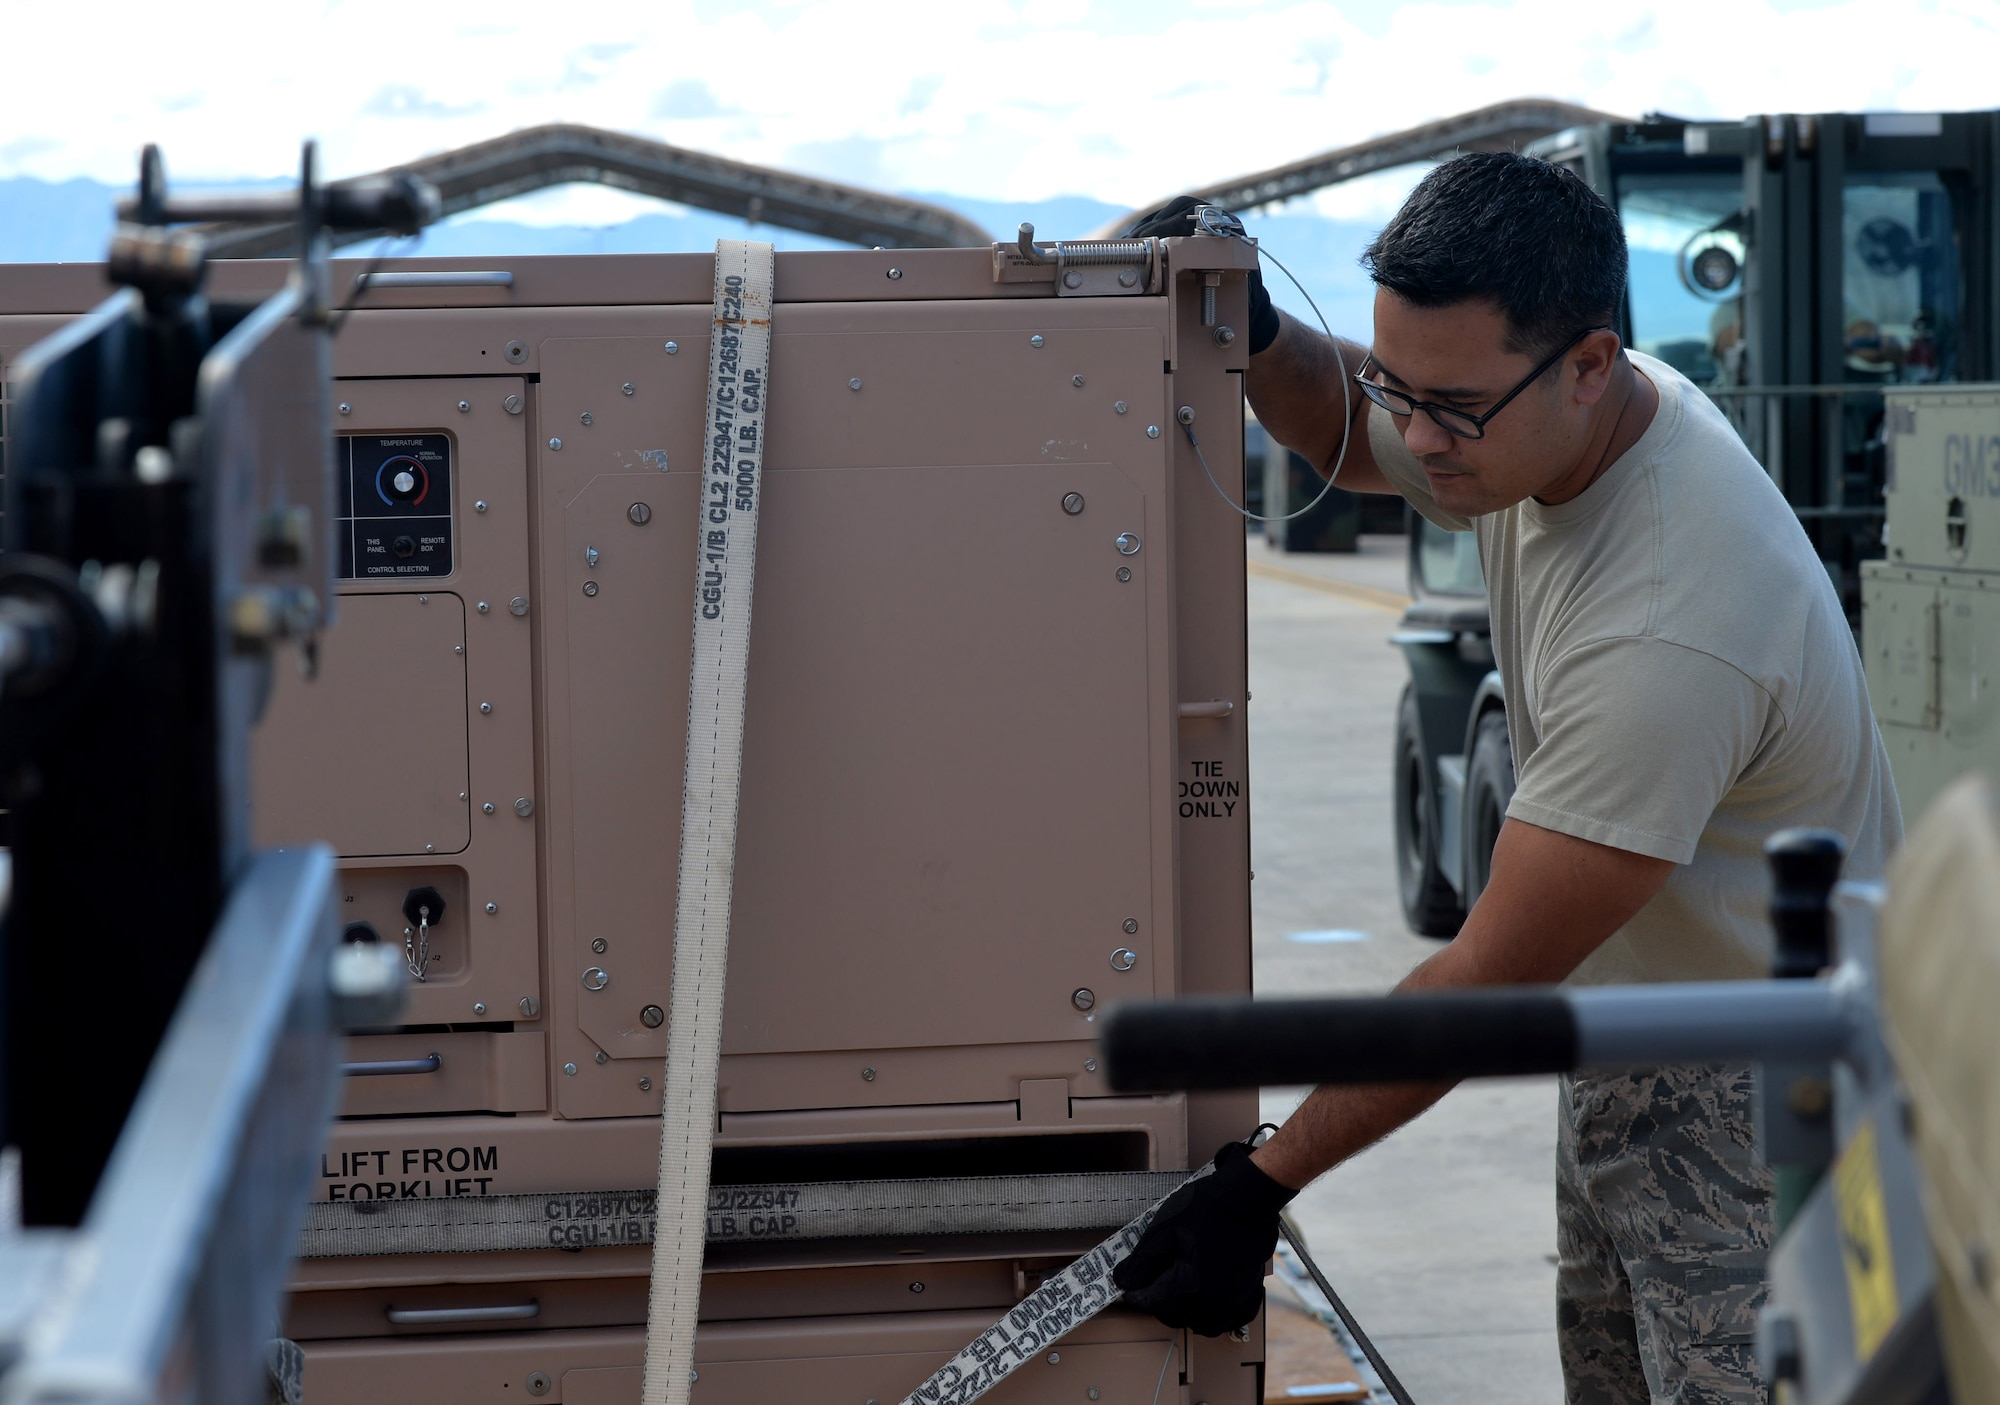 Tech. Sgt. Nicholas, 432nd Maintenance Squadron Aerospace Ground Equipment craftsman, loads pallets to be shipped to a deployment location Oct. 6, 2015, at Creech Air Force Base, Nevada. The equipment being sent will be received by maintainers overseas and used for upkeep on the remotely piloted aircraft. (U.S. Air Force photo by Senior Airman Christian Clausen/Released)